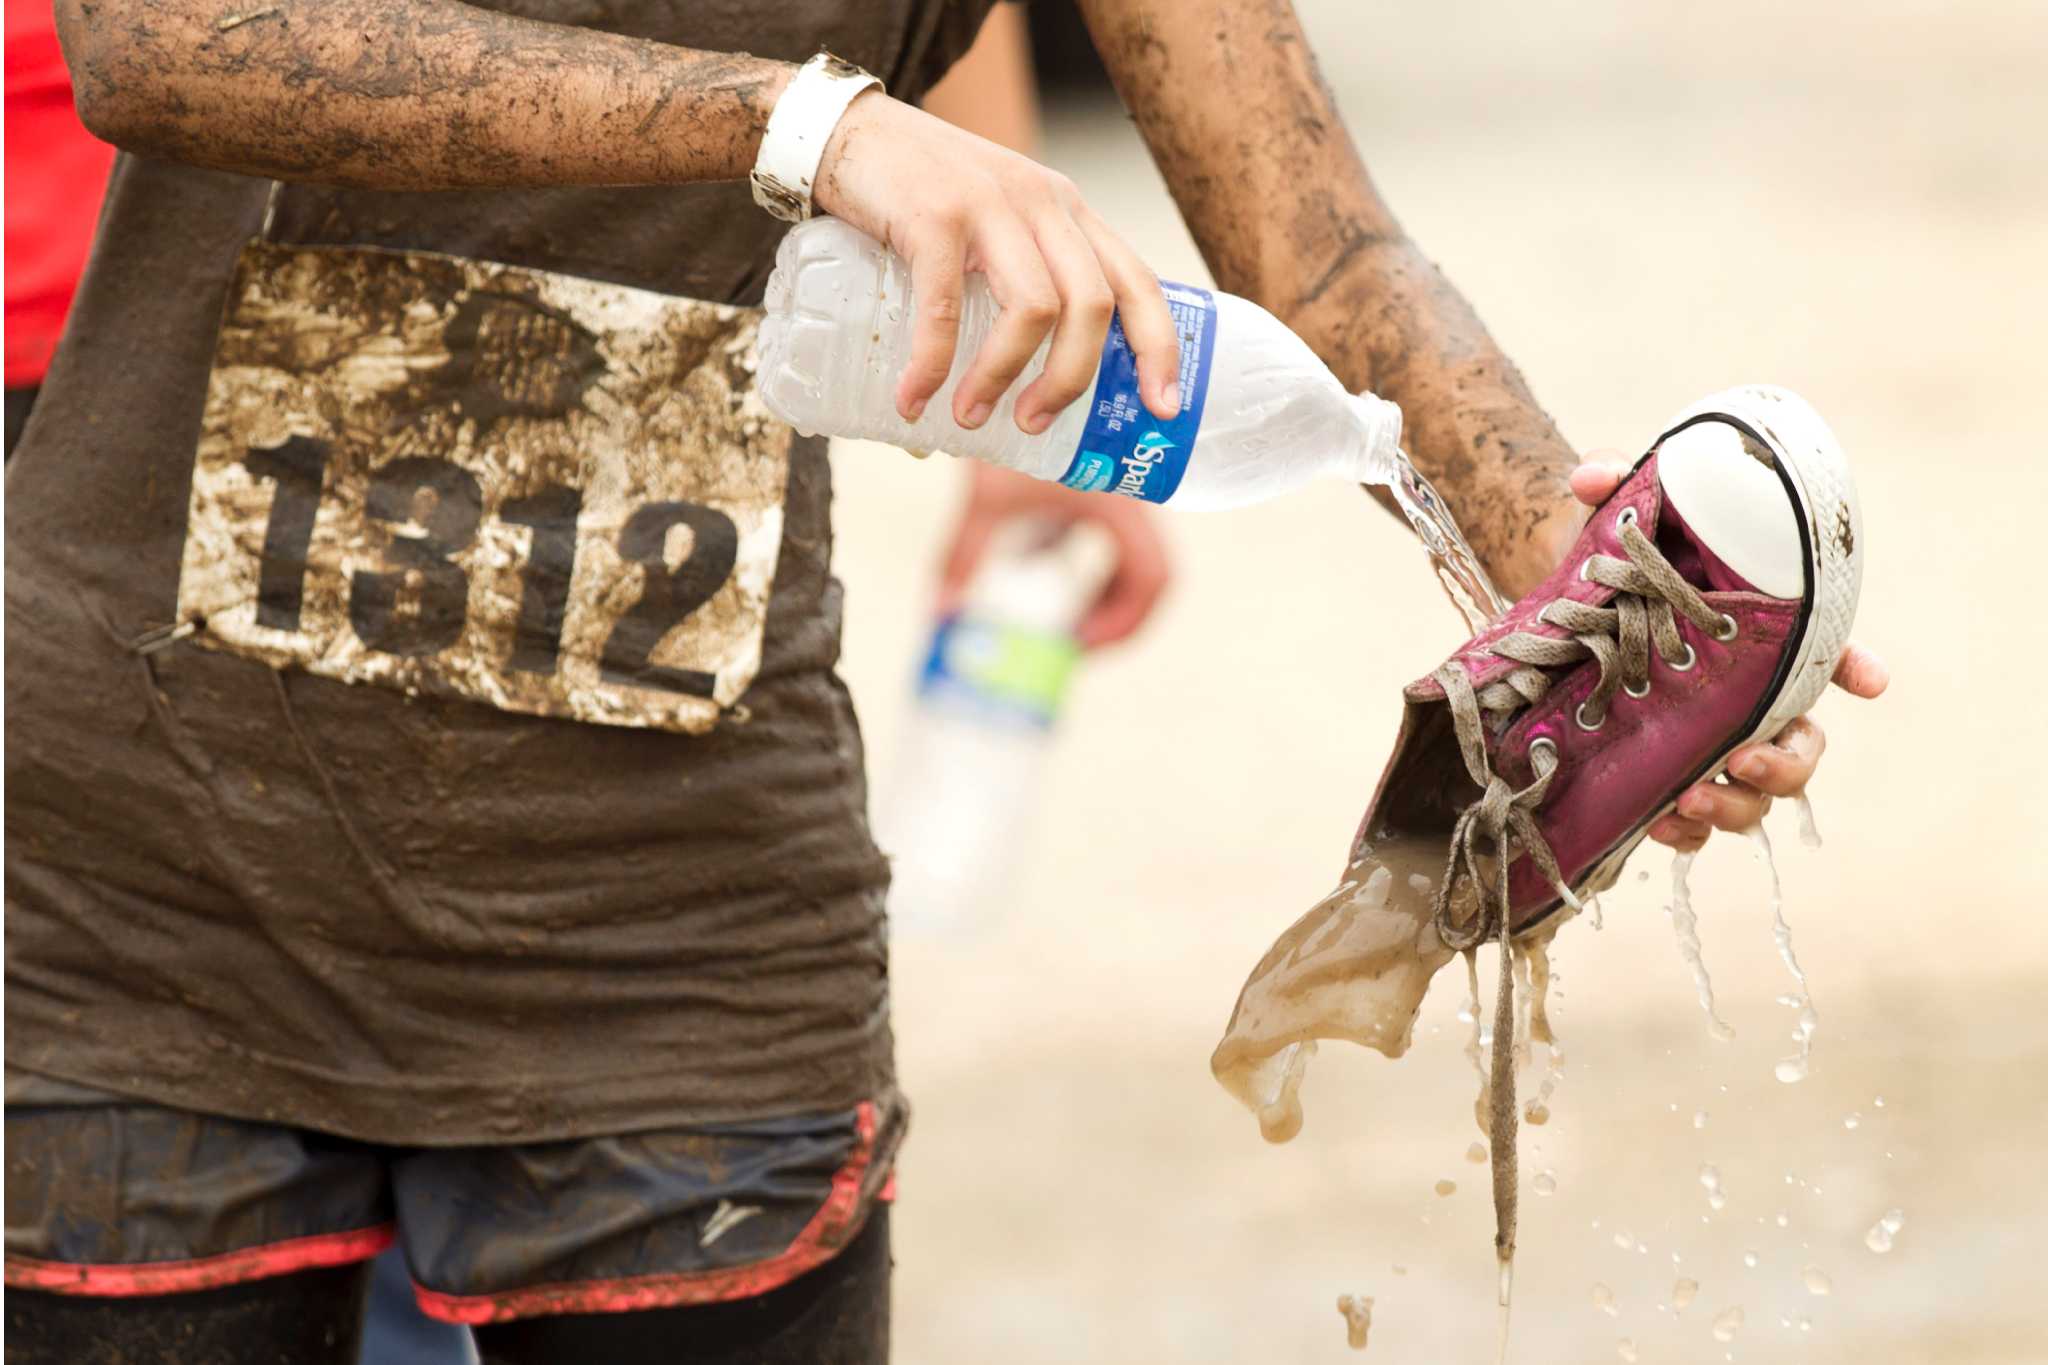 1,000 runners get sick with Norovirus after mud run in